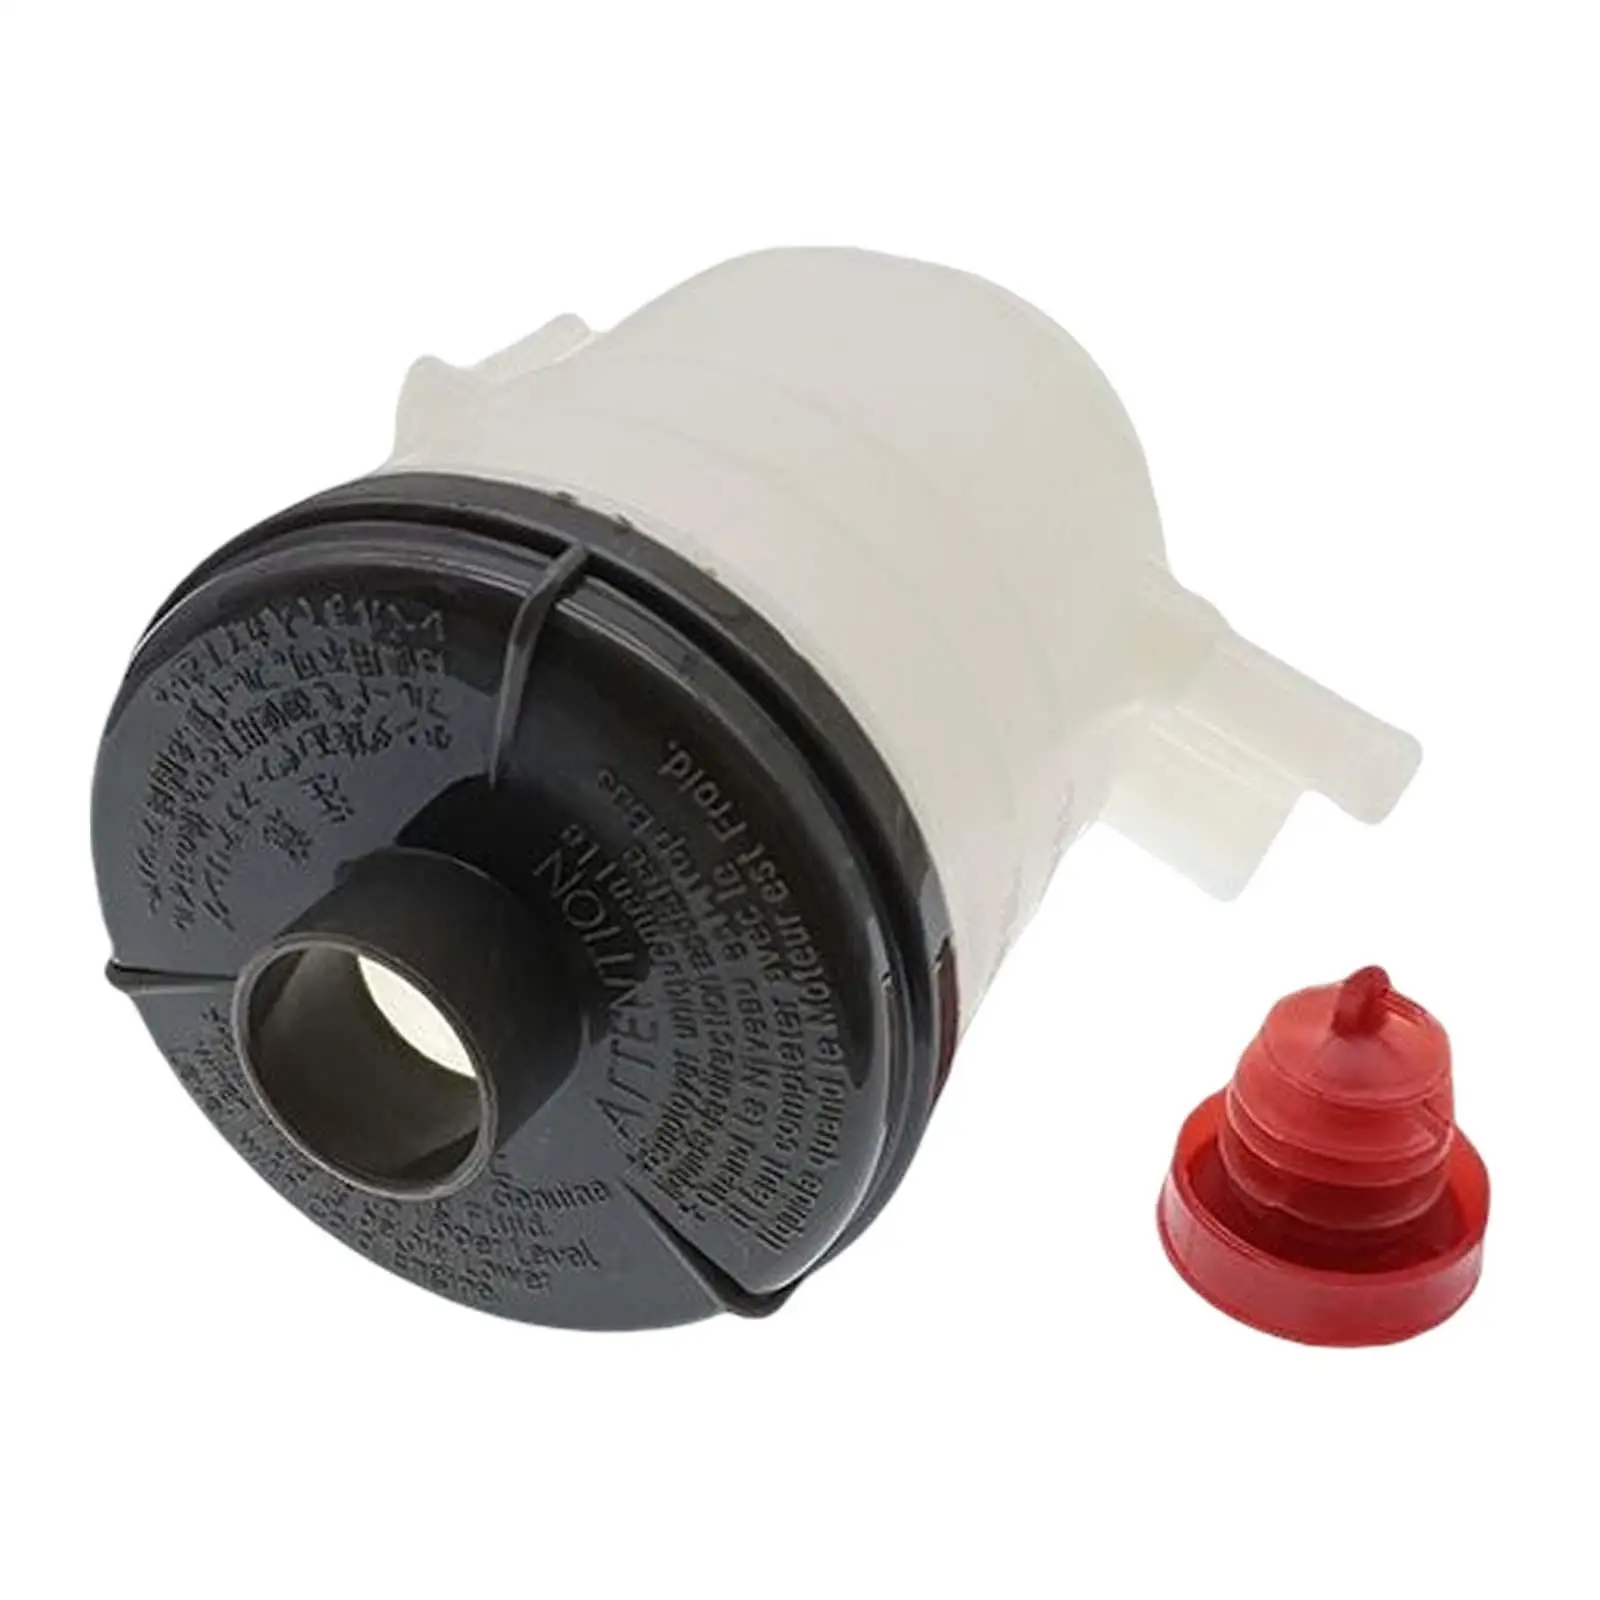 Booster Pump Oil Cup professional Accessories Easy to Install Power Steering Pump Reservoir for Honda Accord 98-02